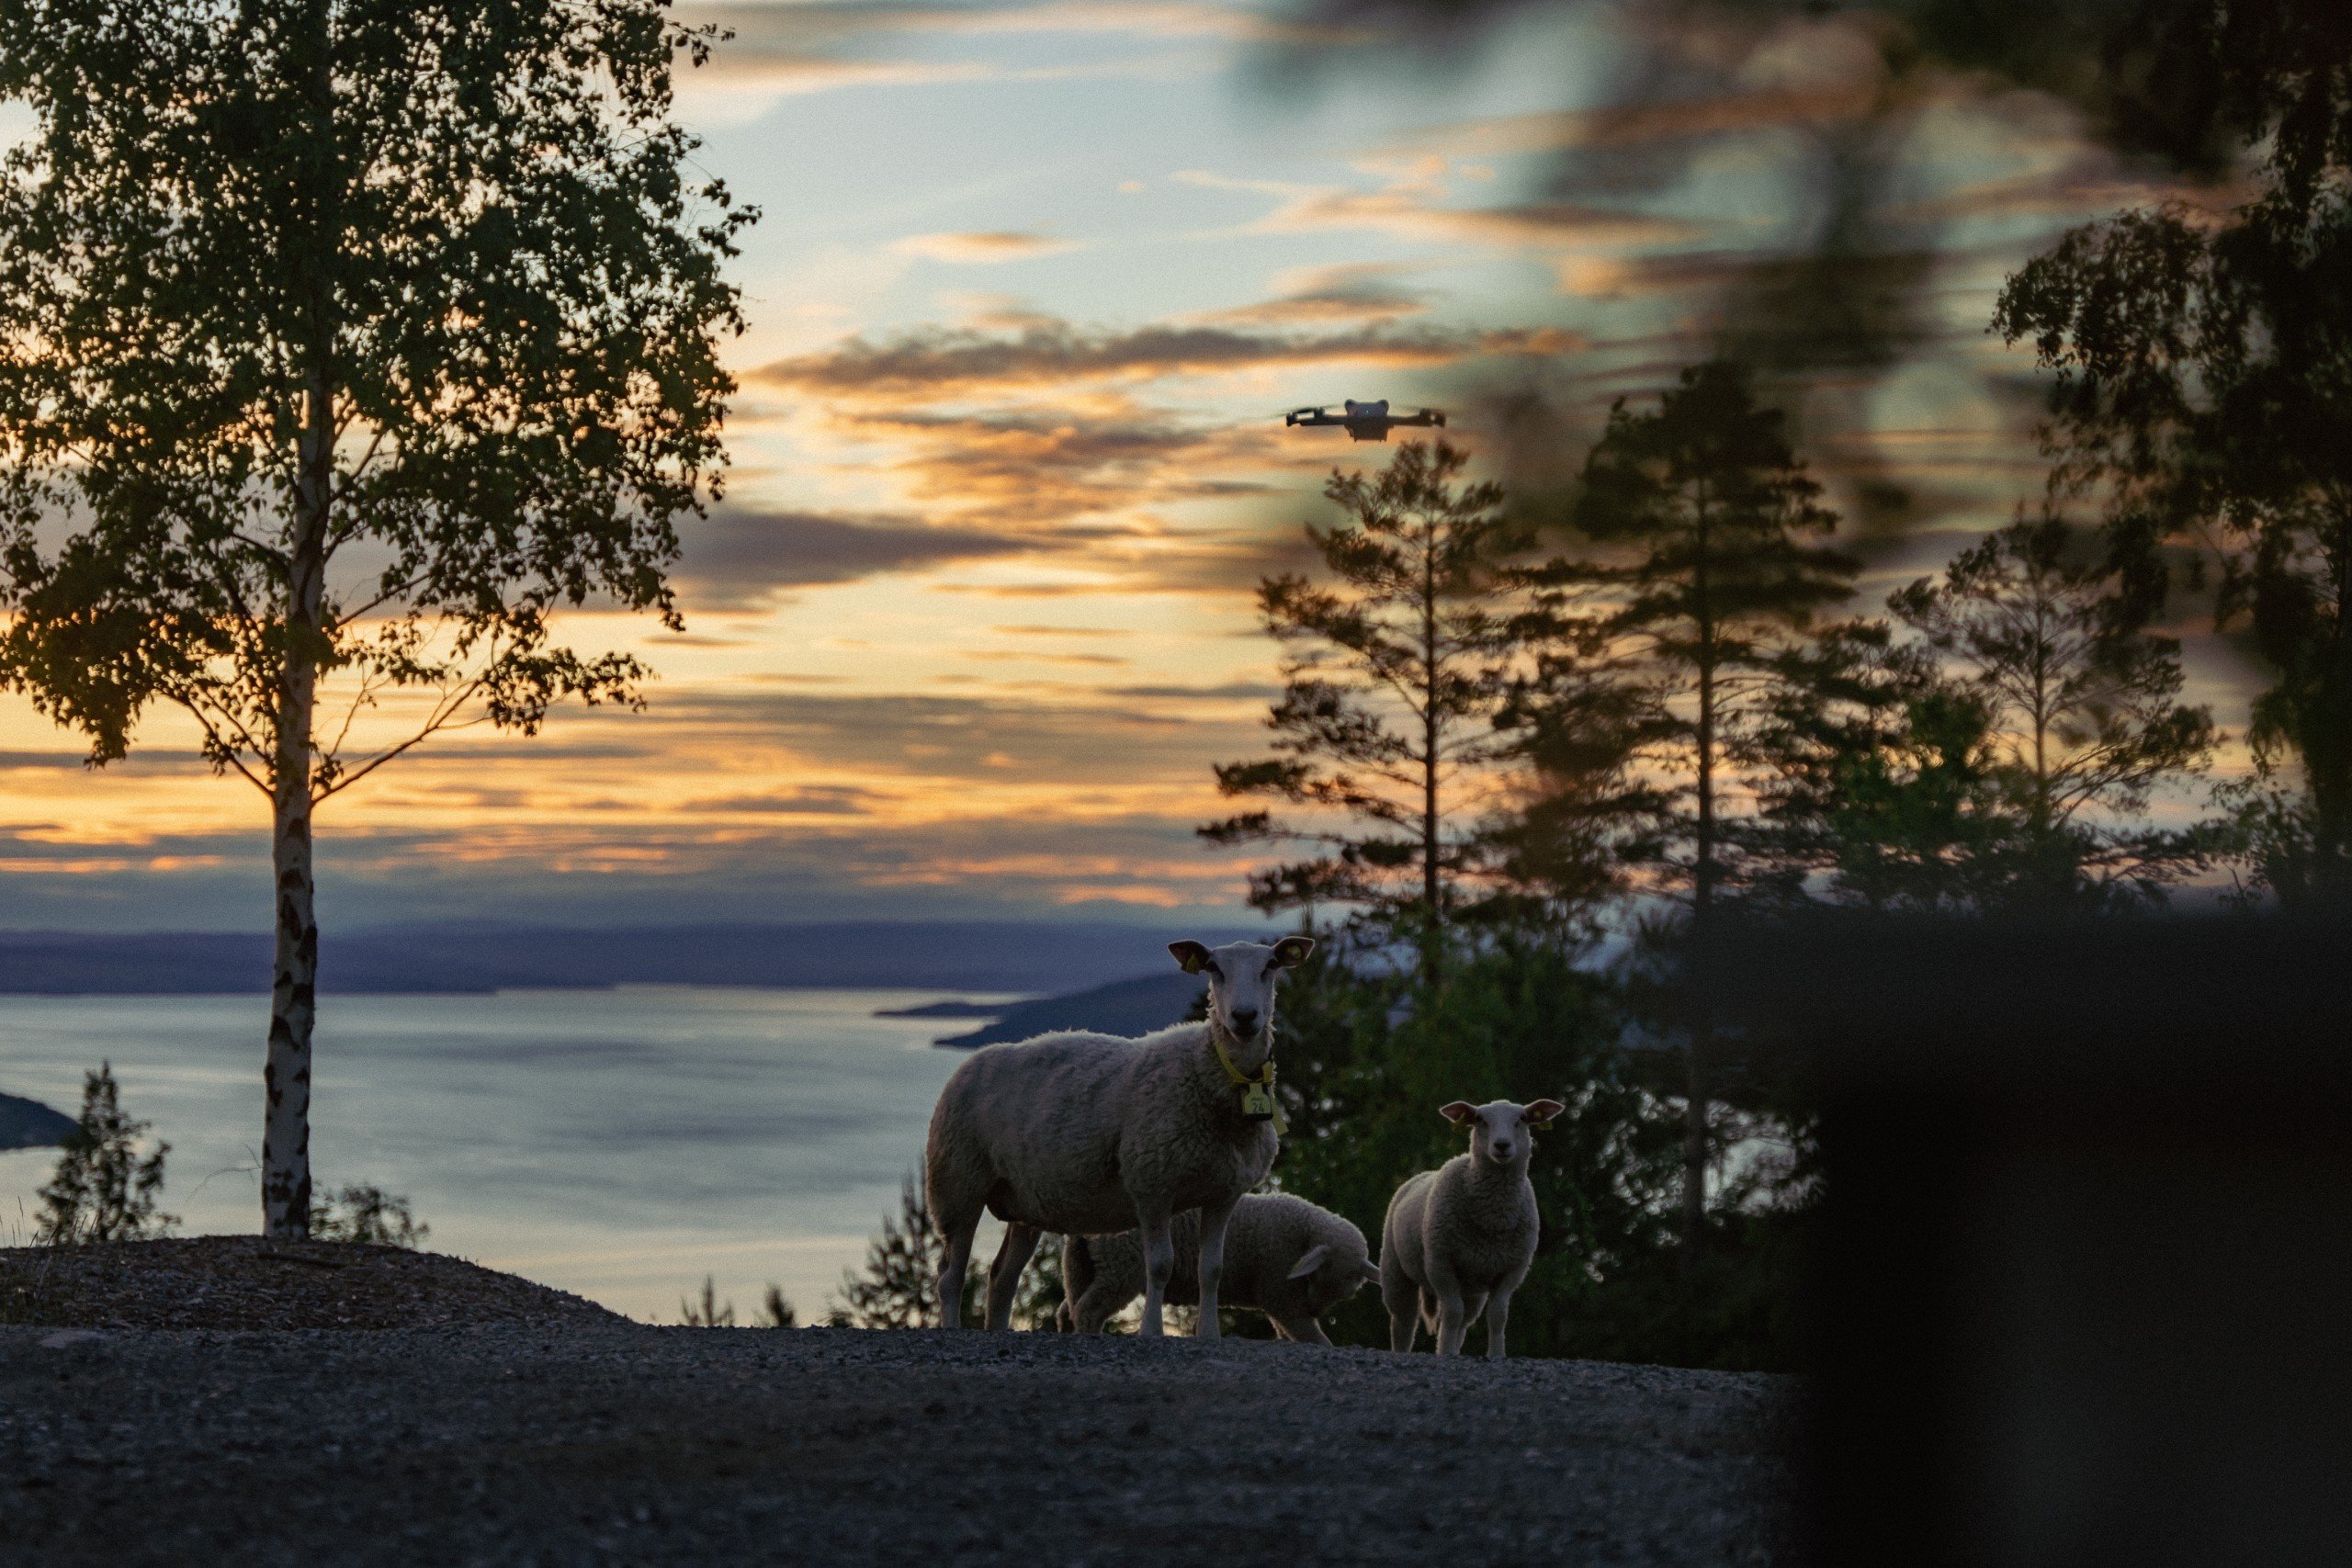 Sheep and trees in the evening with a lake in the background